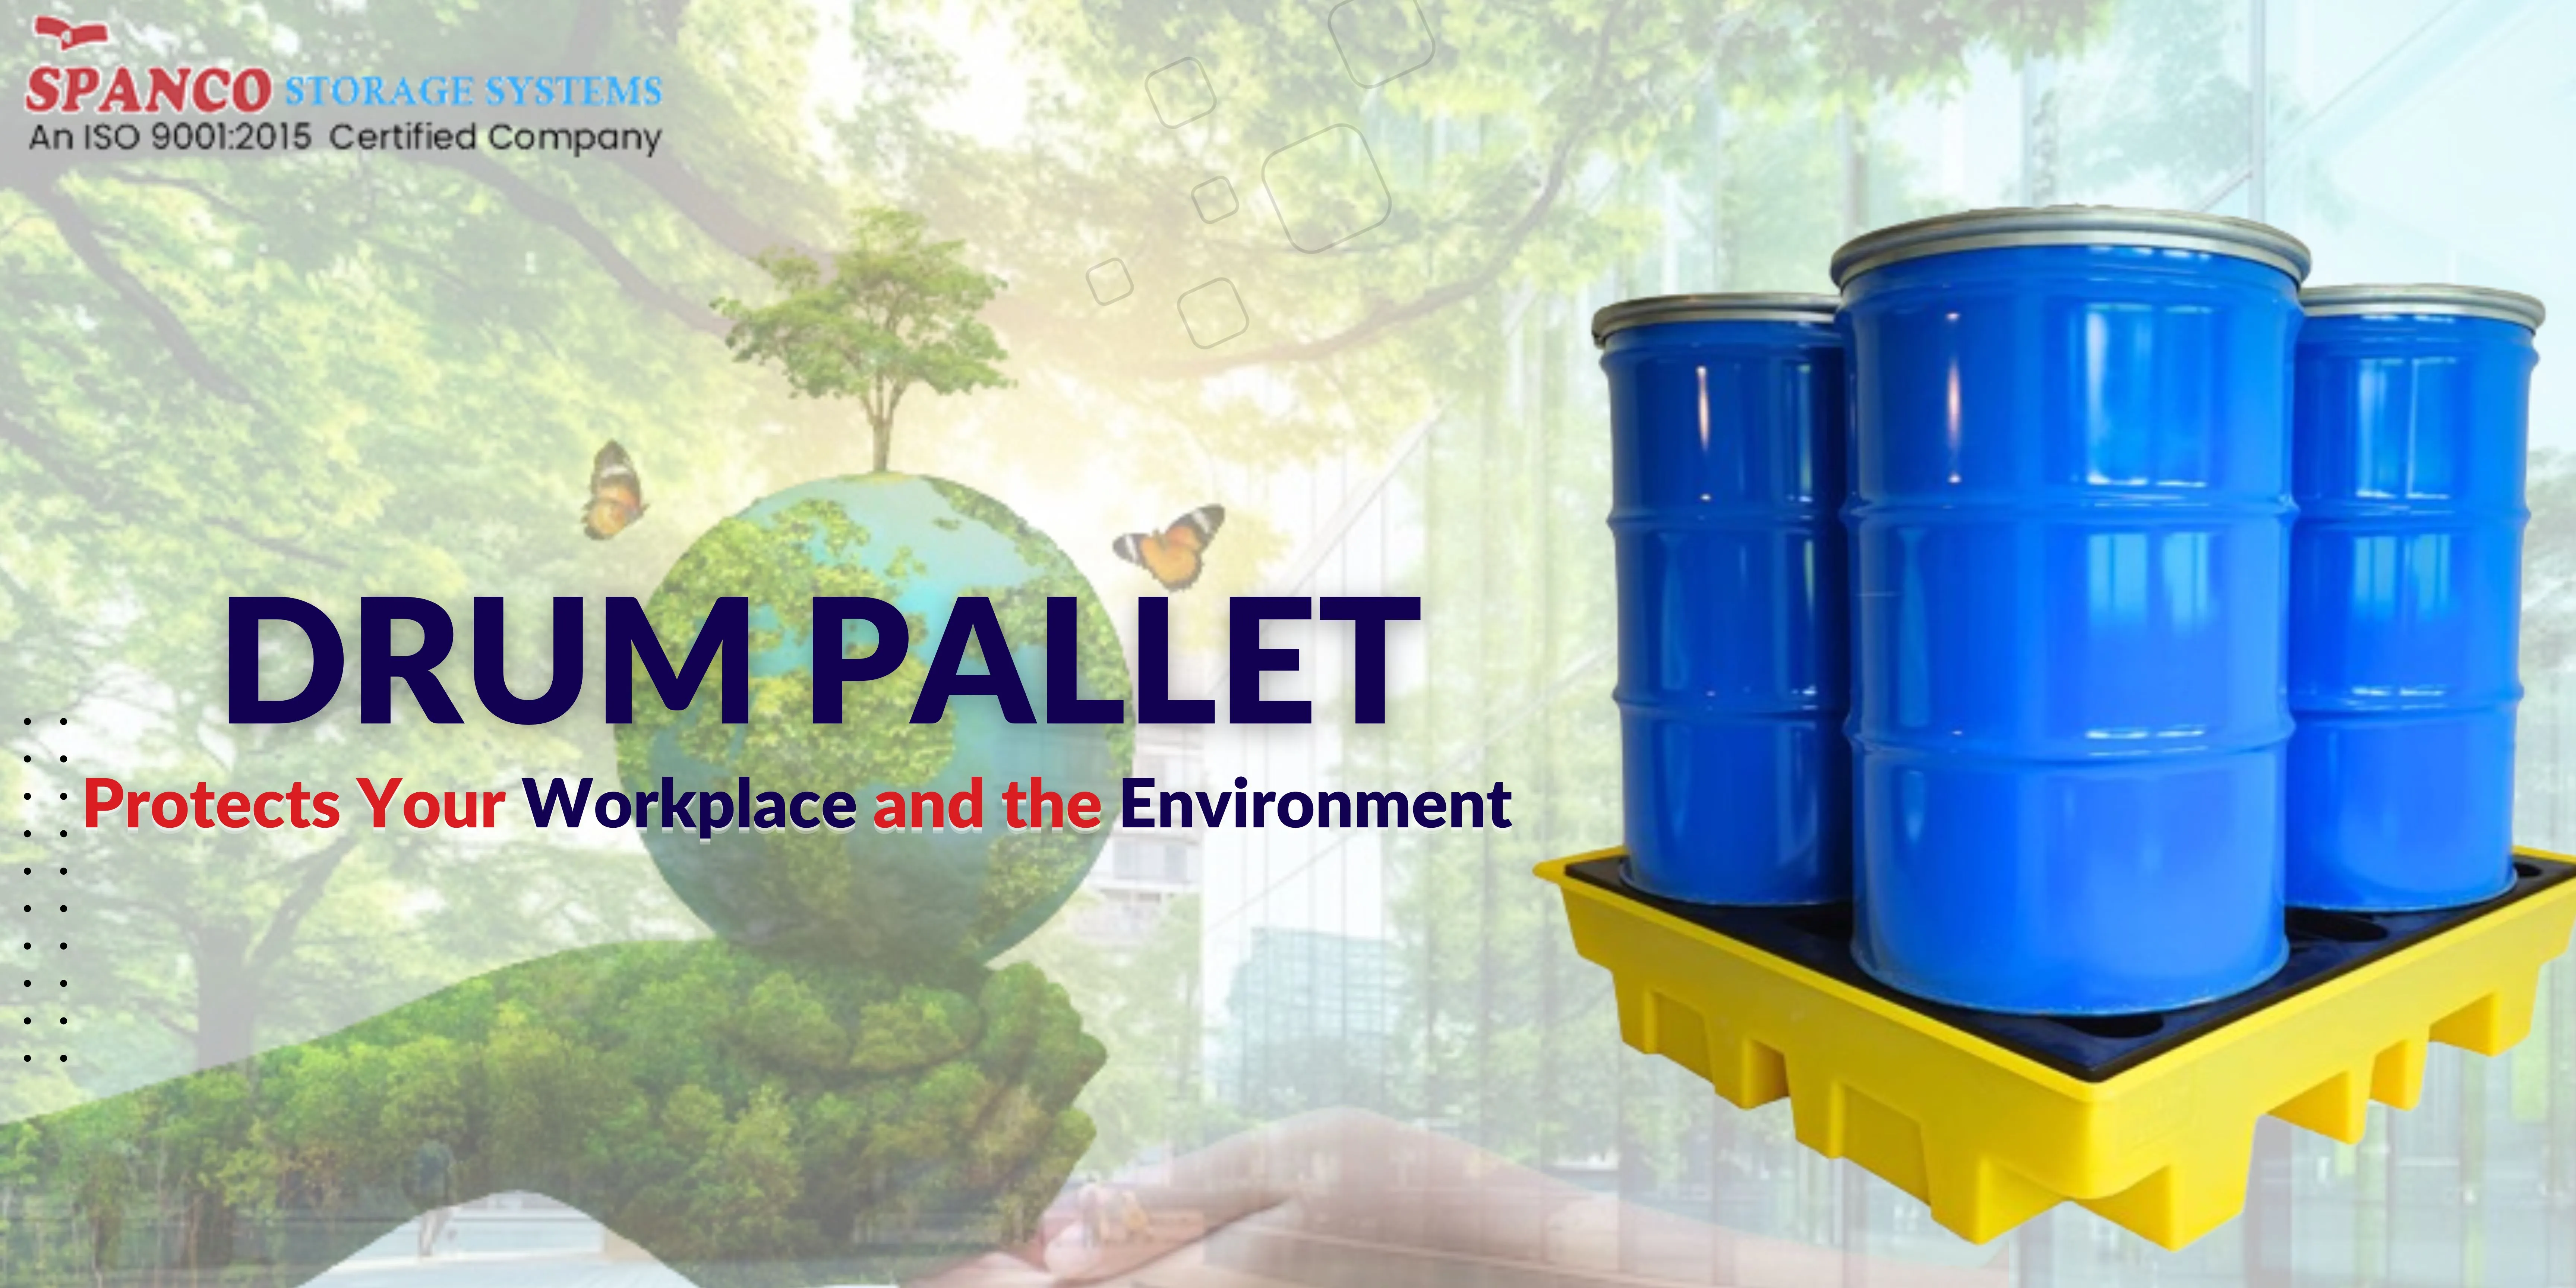 How Drum Pallet Protects Your Workplace and the Environment?